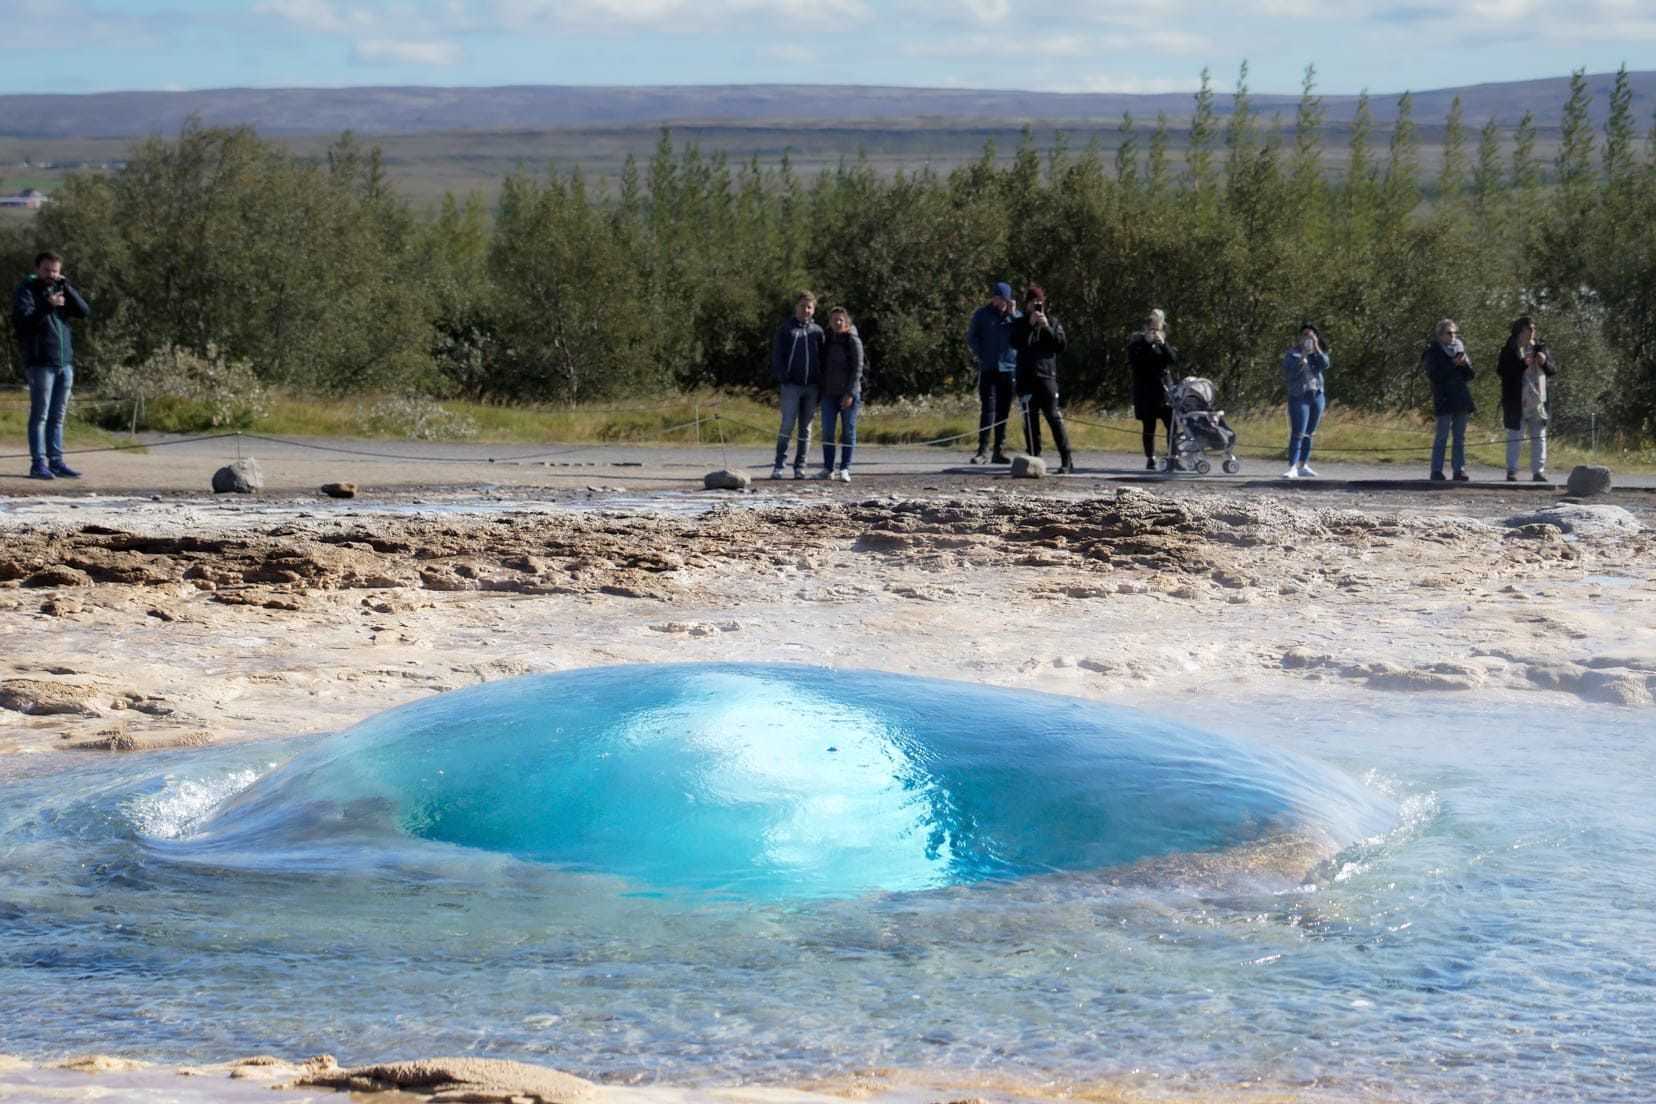 A huge geysir about to erupt it looks like a blue bubble rising out of the ground